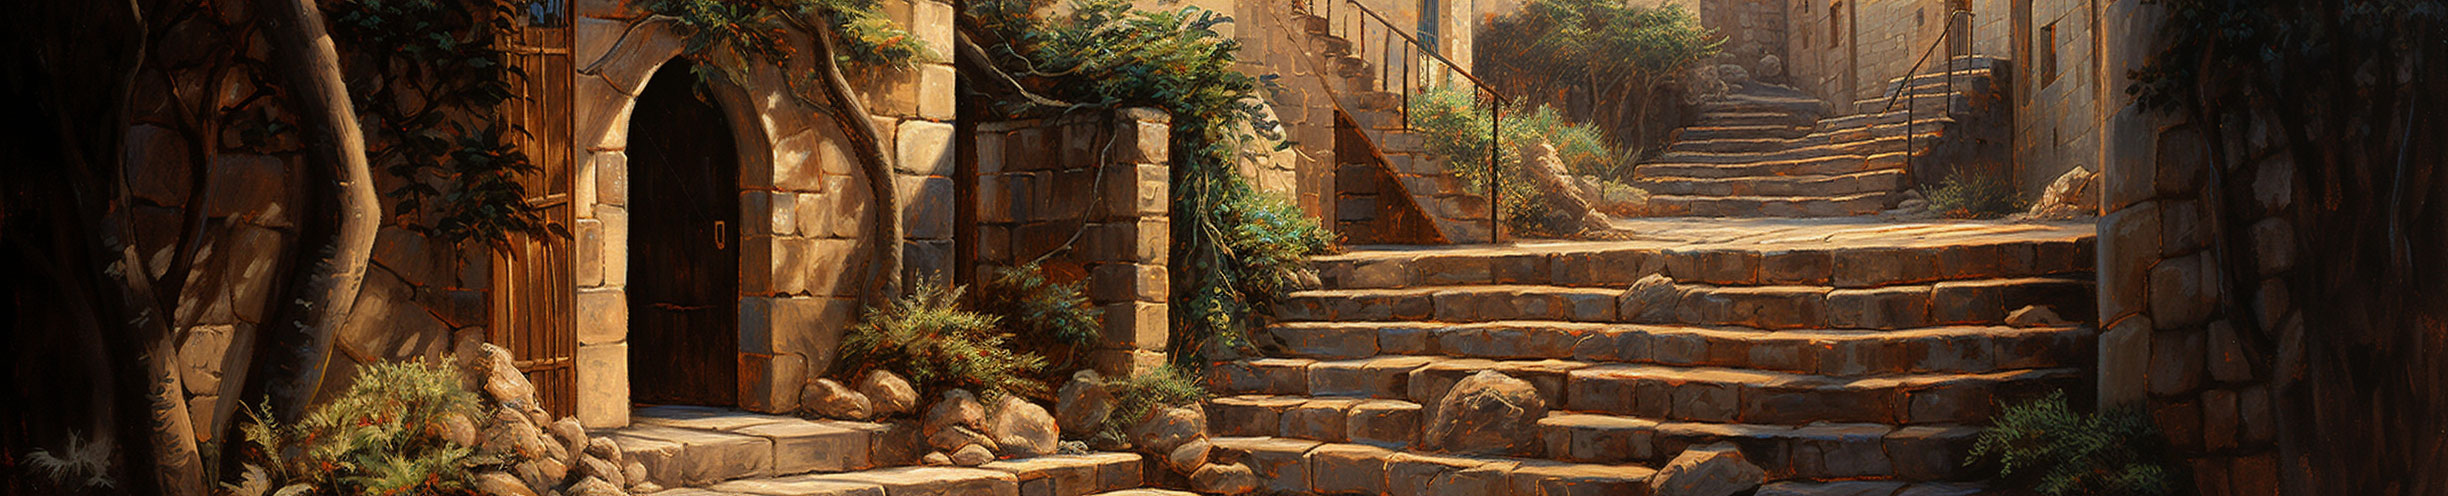 tychodreq_a_finely_detailed_oil_painting_of_a_stone_stairs_lead_2b2bf97e-6b9e-41a6-8084-3a920d7bf2f9.jpg